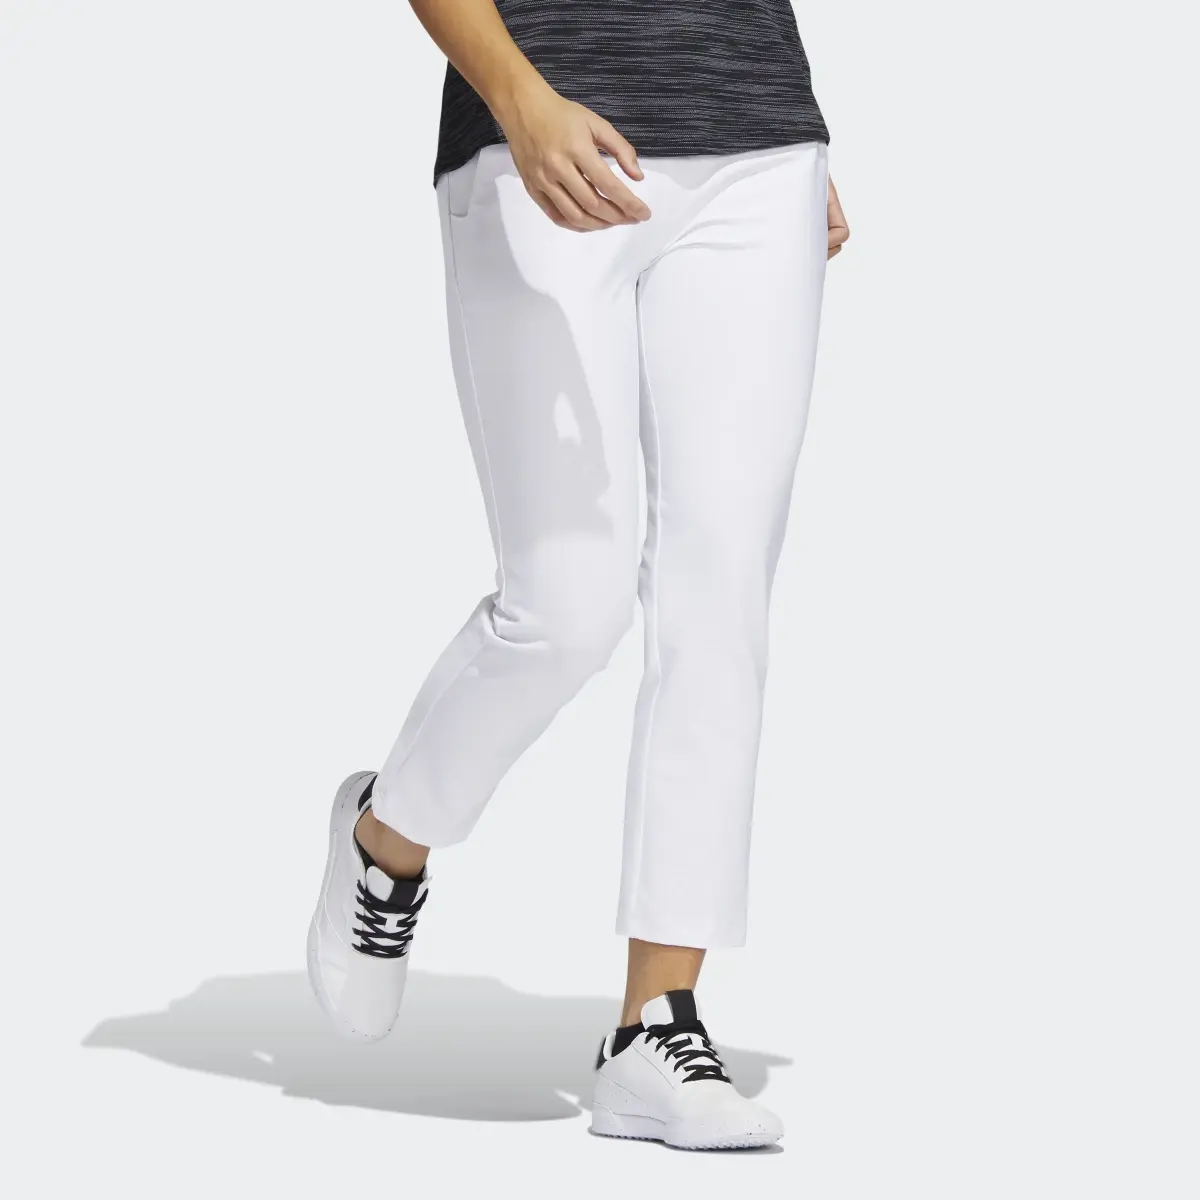 Adidas Pull-On Ankle Pull-On Ankle Golf Pants. 3